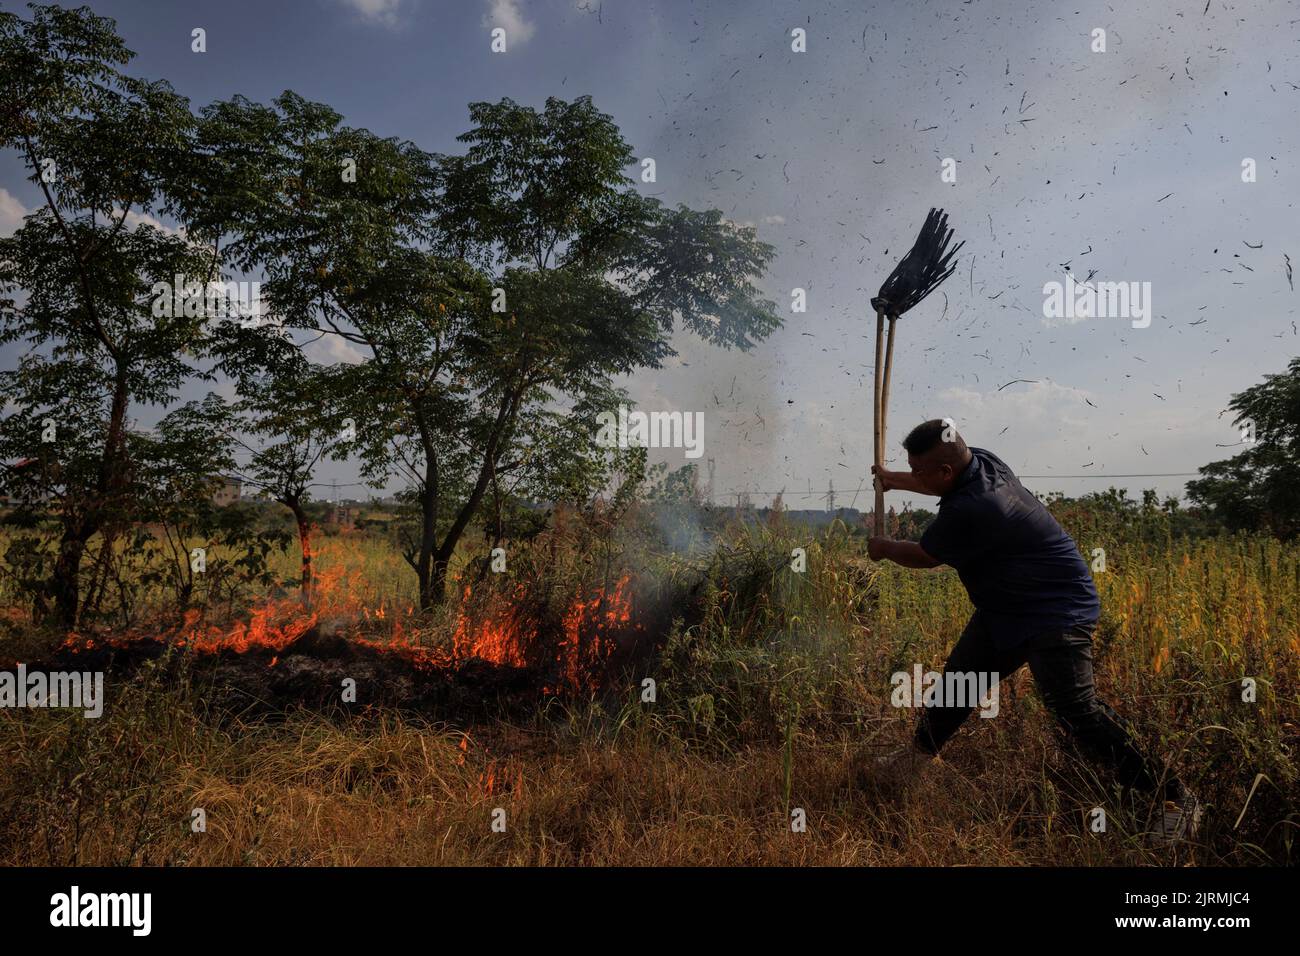 A villager attempts to put out a brush fire with a mop during a drought in Xinyao village, Nanchang city, Jiangxi province, China, August 25, 2022.  REUTERS/Thomas Peter Stock Photo